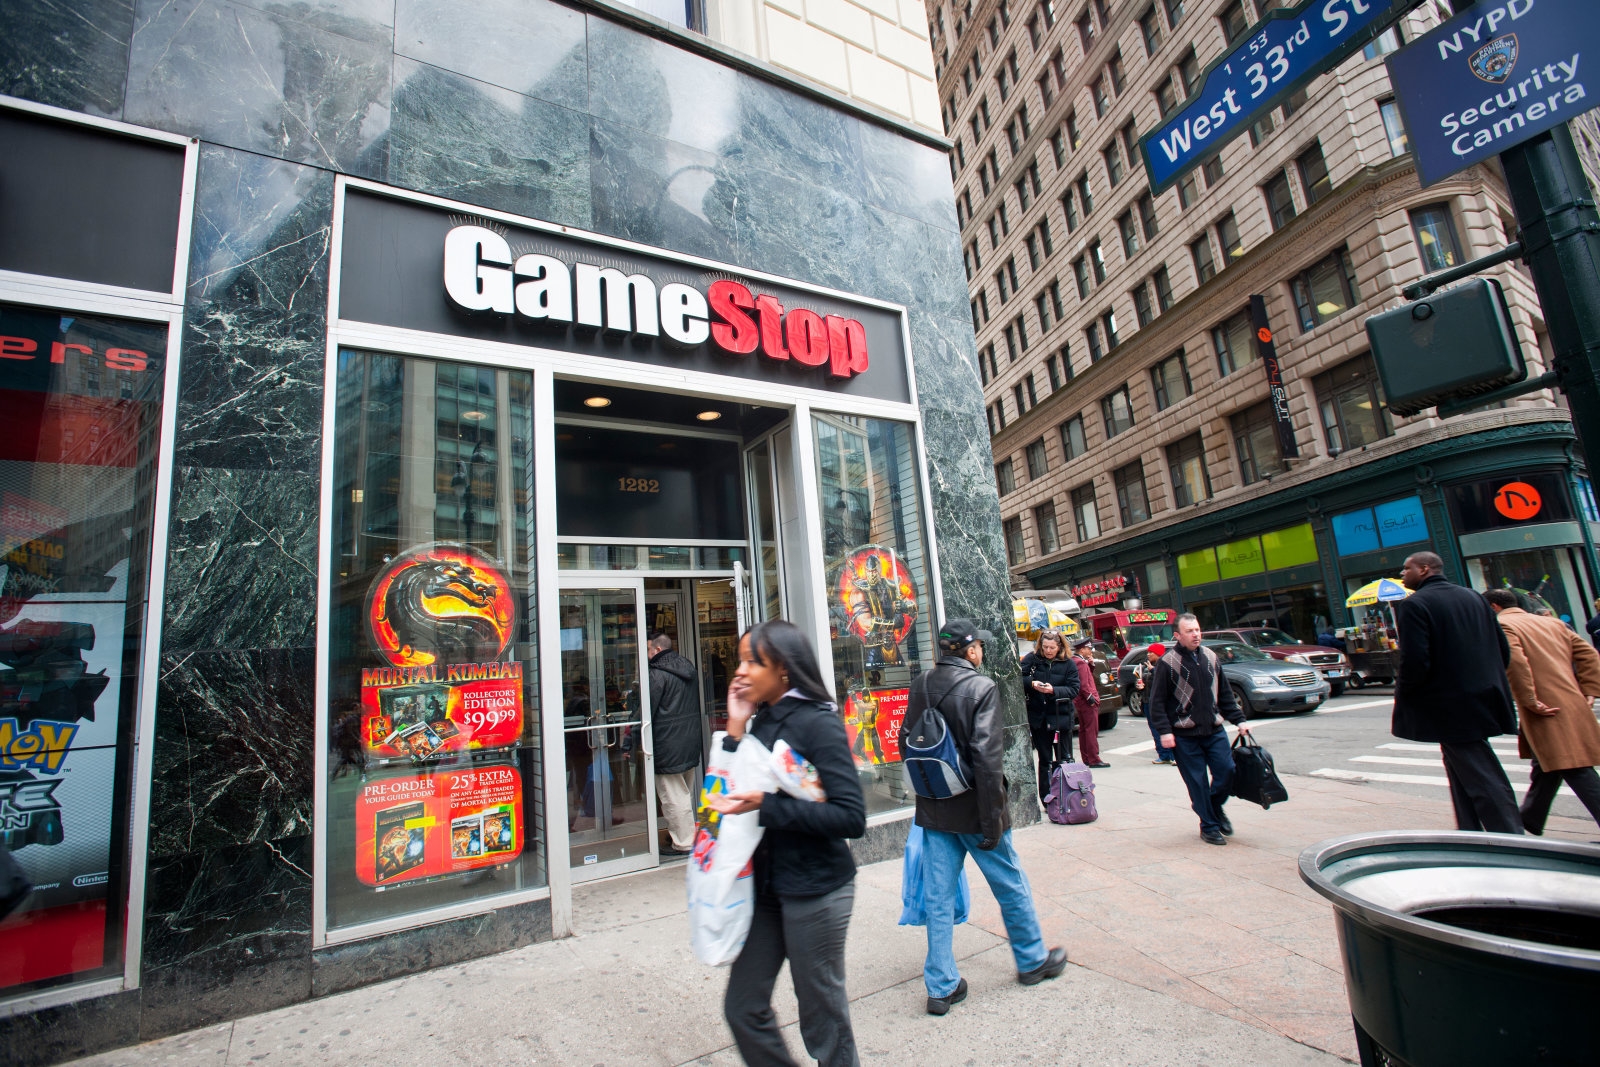 GameStop offers used video game rentals with PowerPass program | DeviceDaily.com